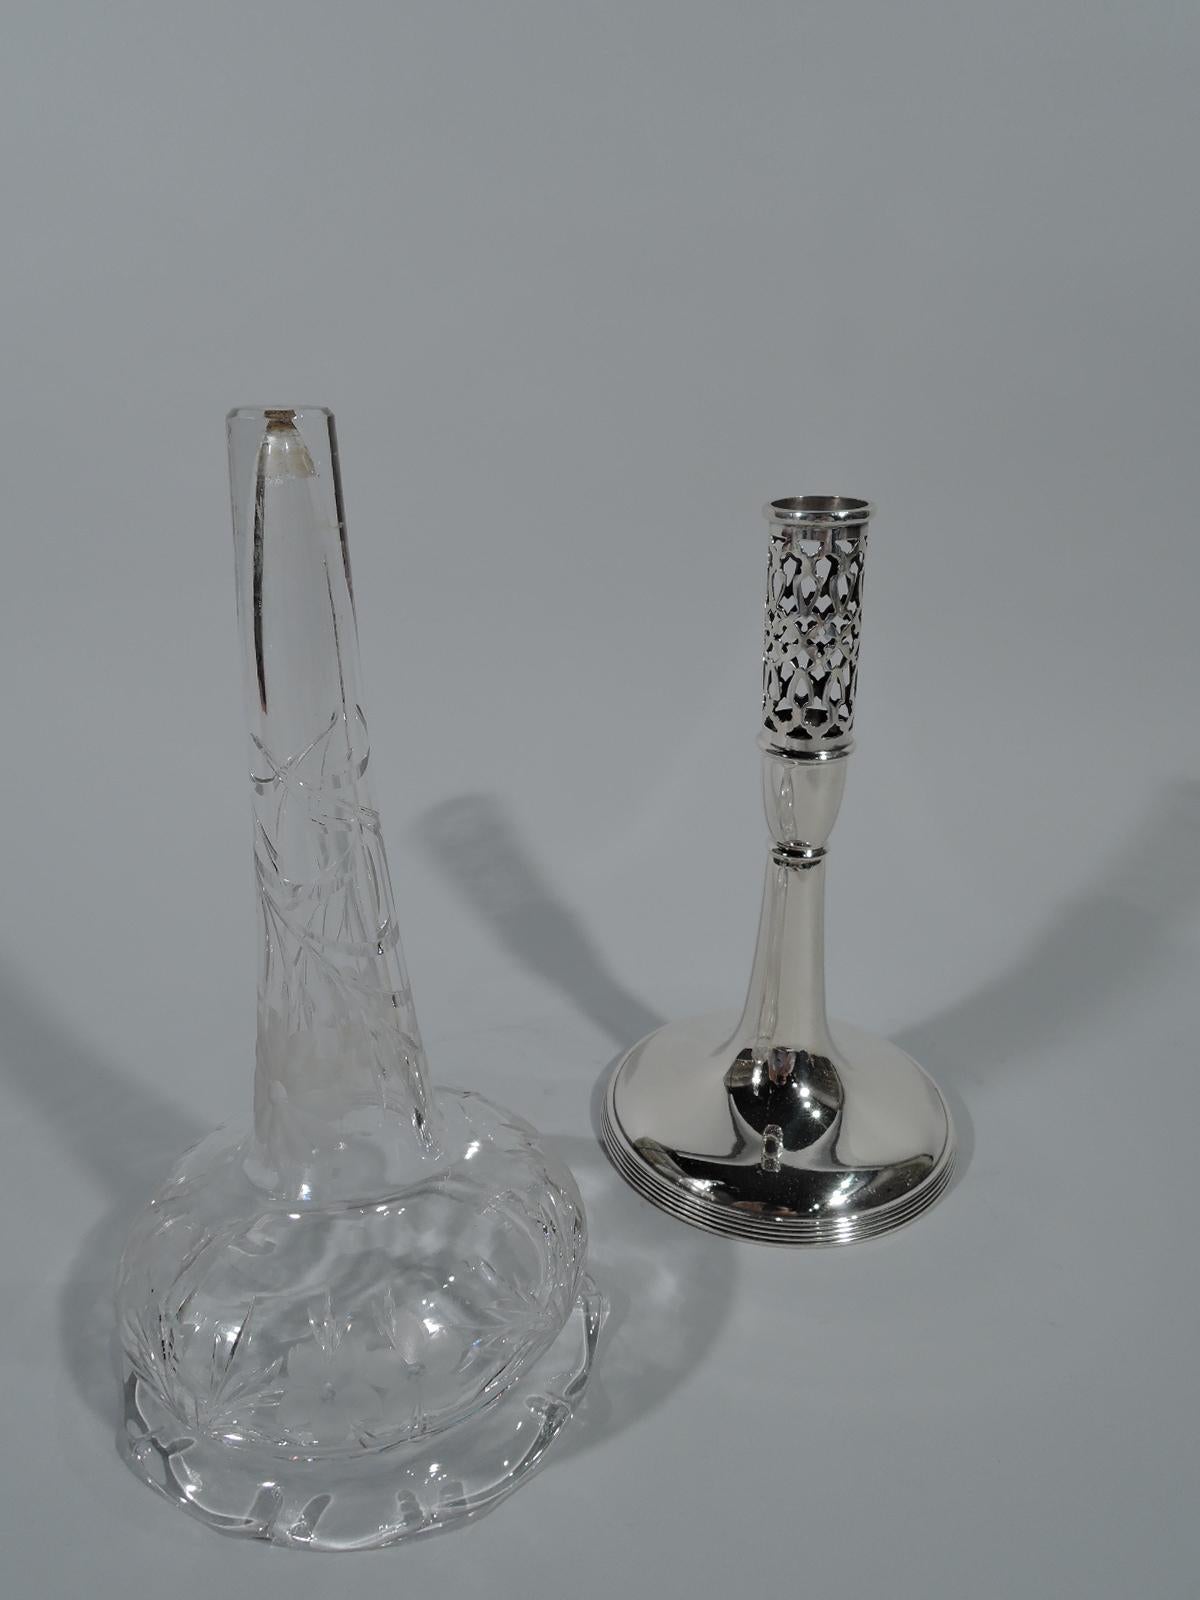 Elegant Edwardian sterling silver and crystal vase. Made by Durgin (later part of Gorham) in Concord, NH. Sterling silver base comprising pierced cylinder on urn mount terminating in upward tapering shaft on raised foot with reeded rim. Crystal